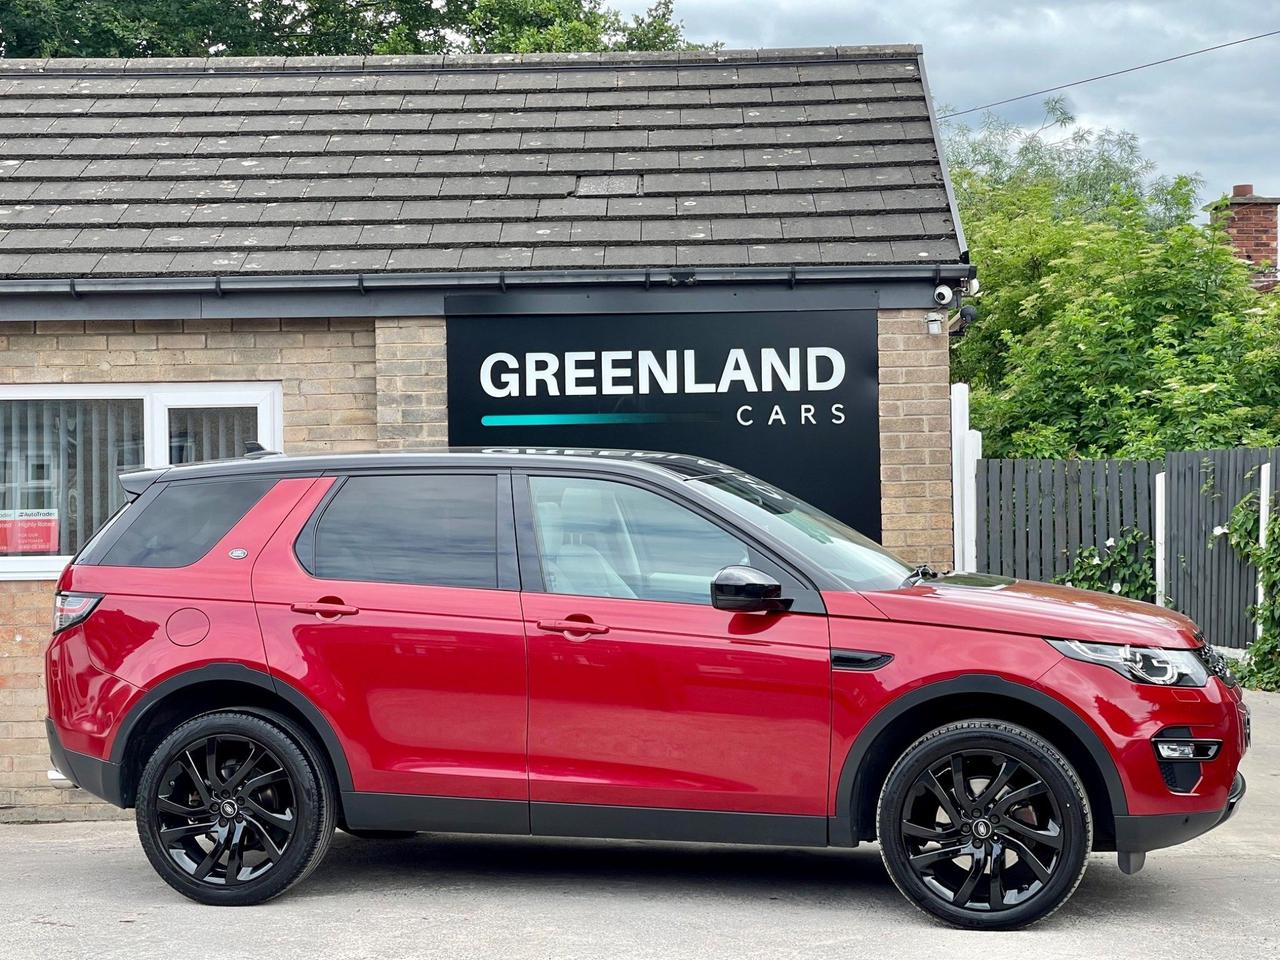 Used 2015 Land Rover Discovery Sport for sale in Sheffield